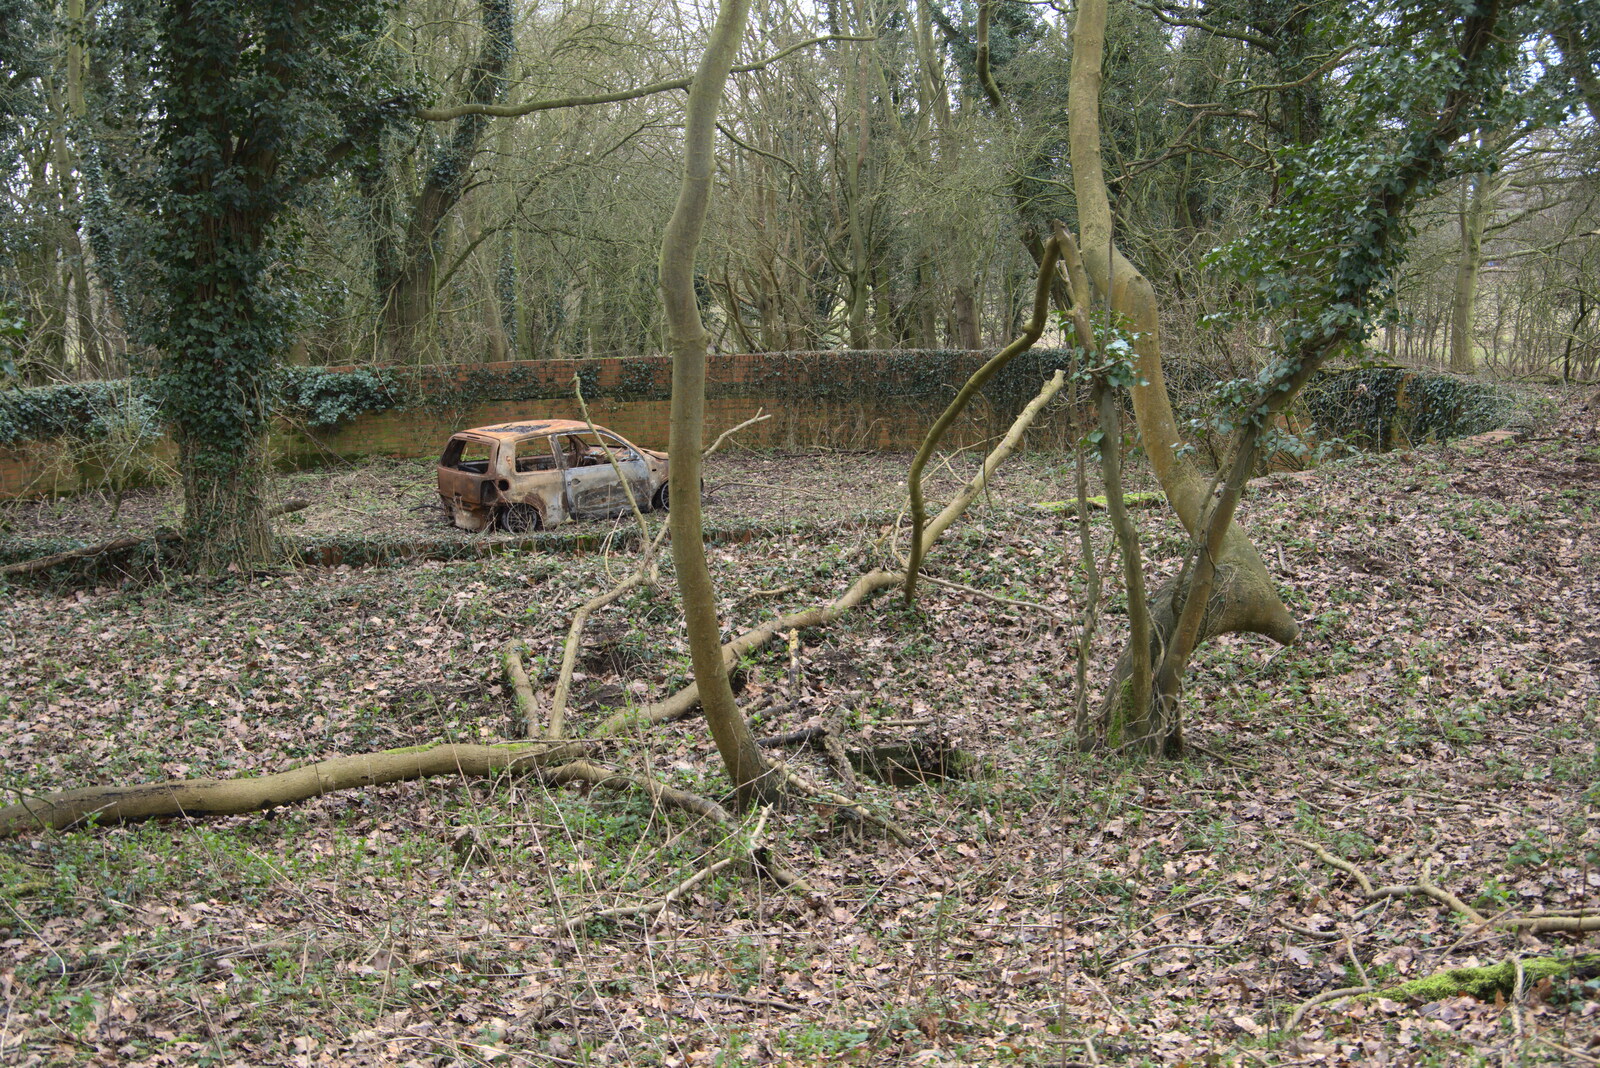 The car surrounded by a circular wall from The Old Sewage Works, The Avenue, Brome, Suffolk - 20th February 2021